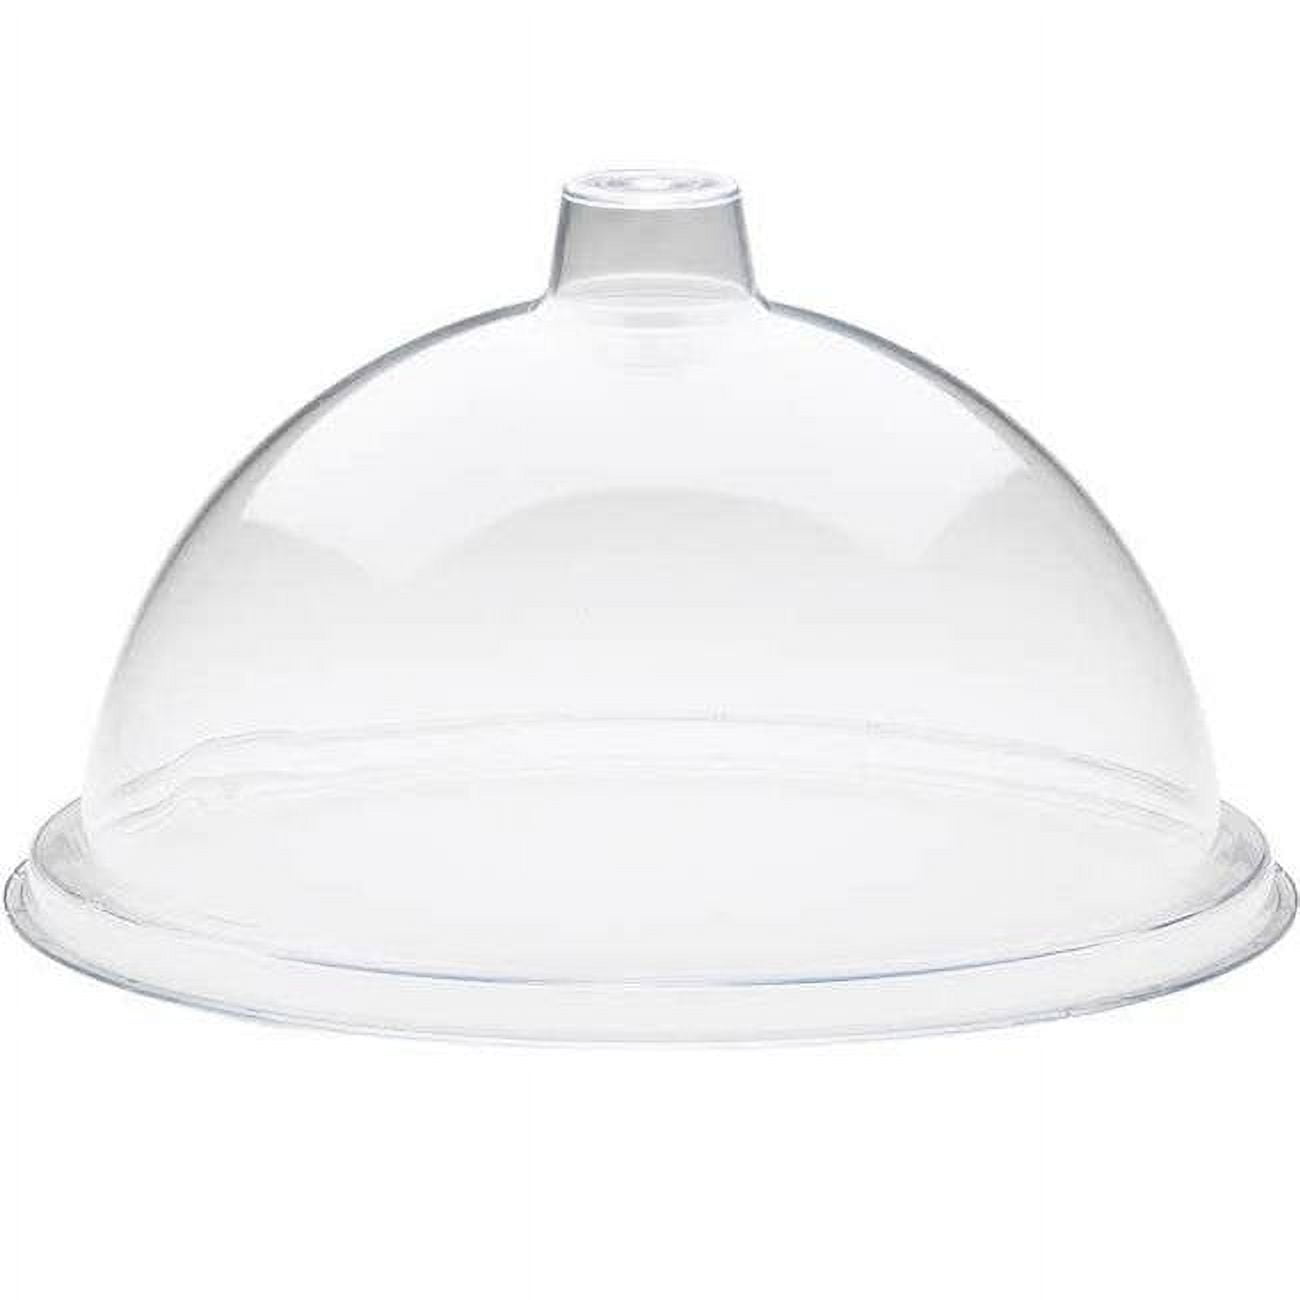 15 In. Gourmet Cover - Clear